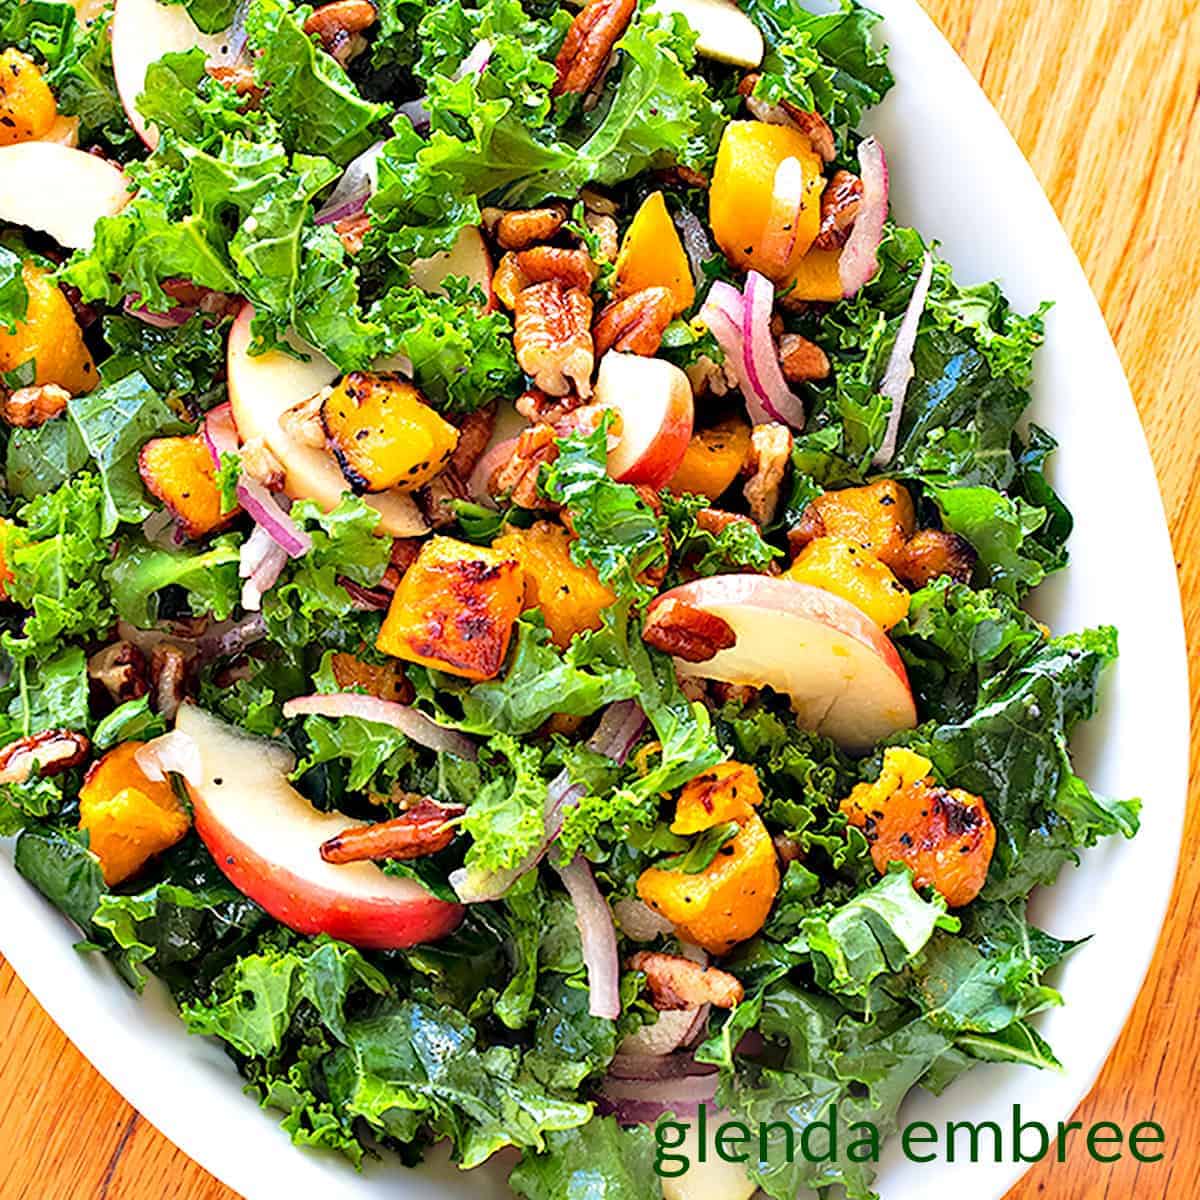 Overhead view of kale salad with apples and roastd butternut squash placed on a white plate.